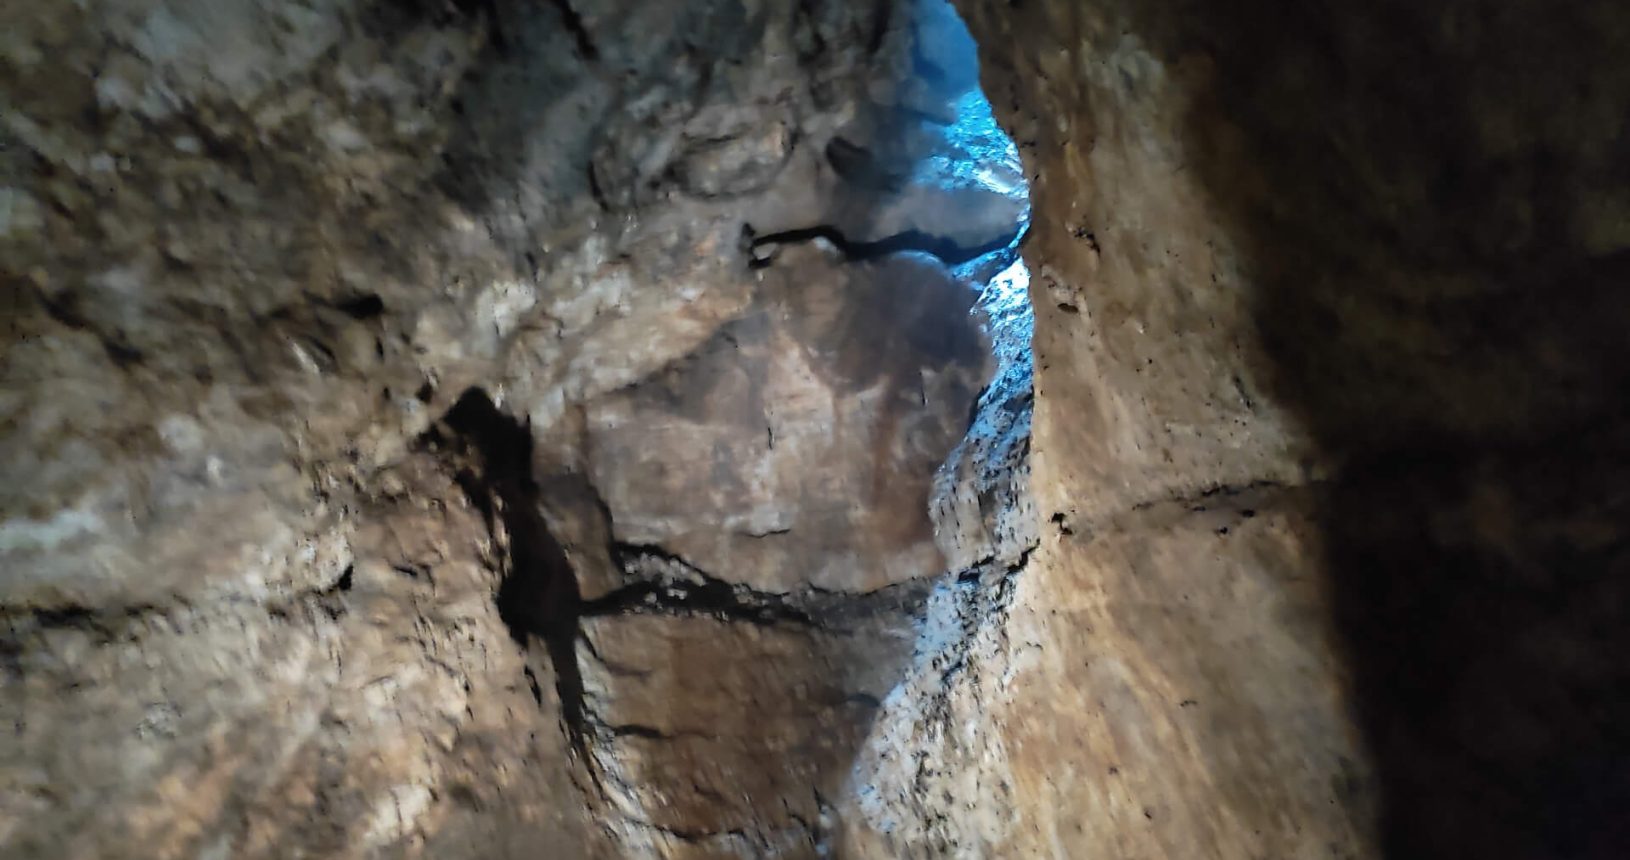 Second free entrance to Lipa Cave